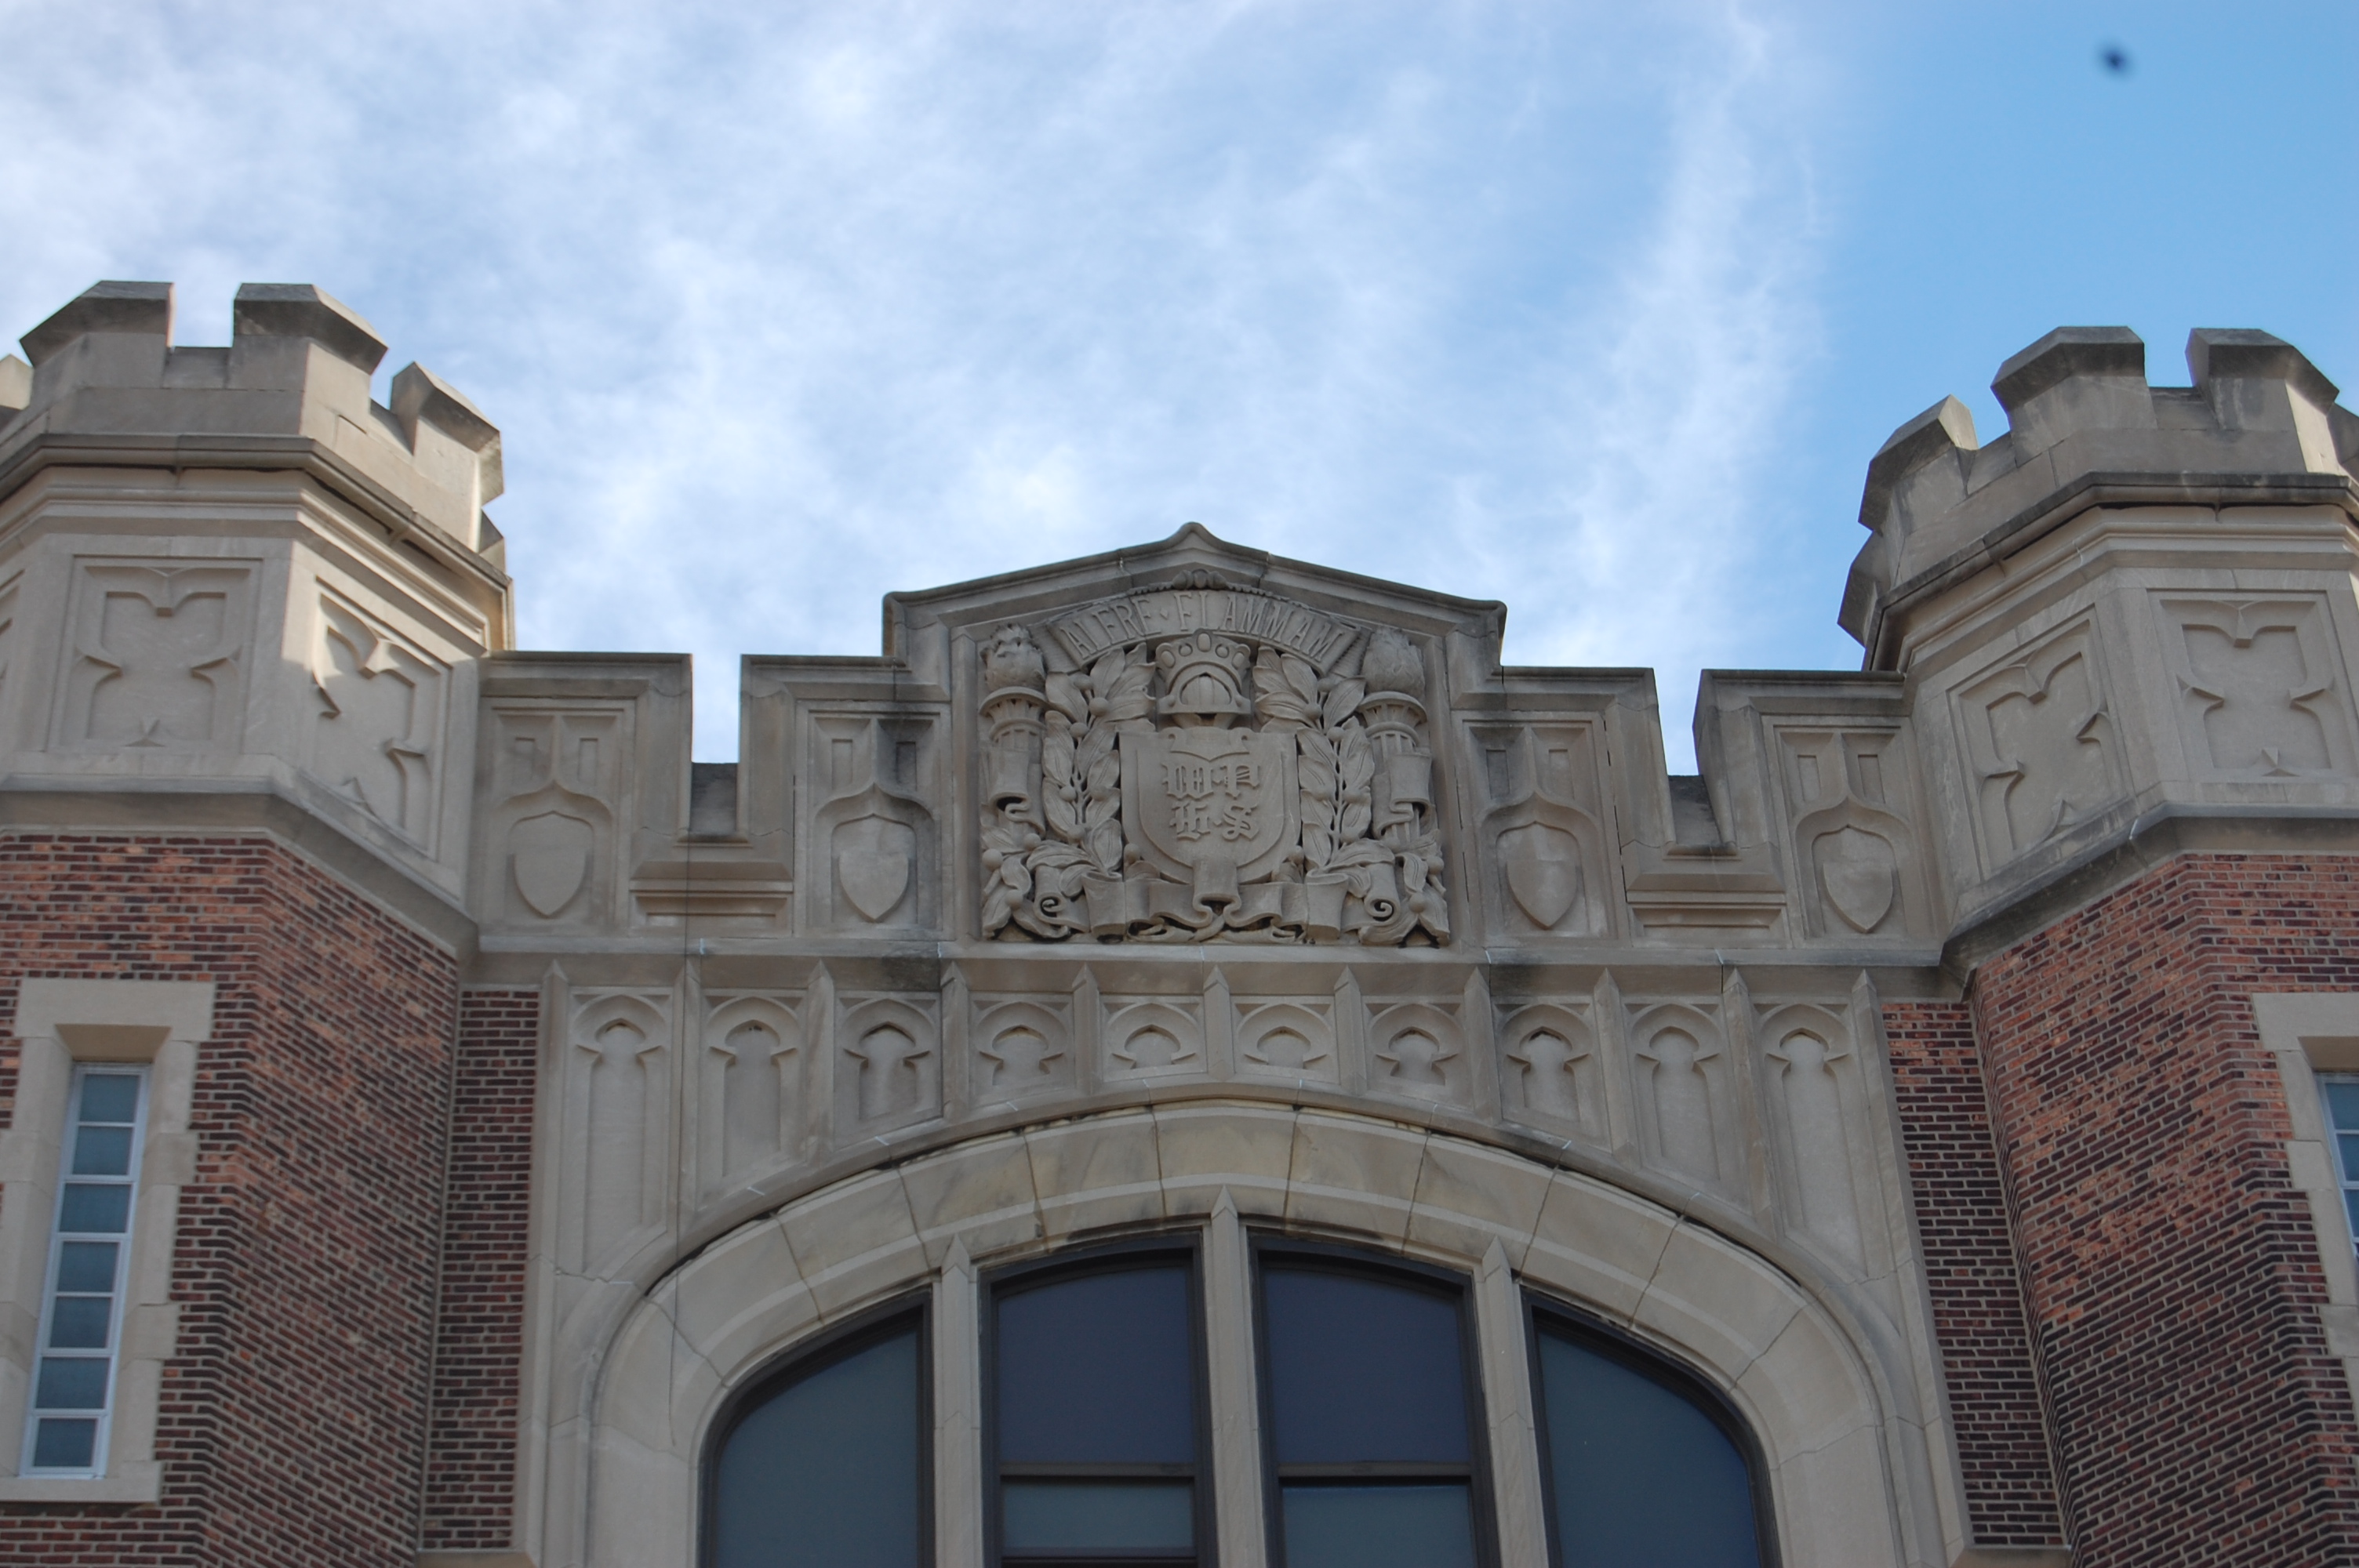 Turrets atop the building's western entrance.